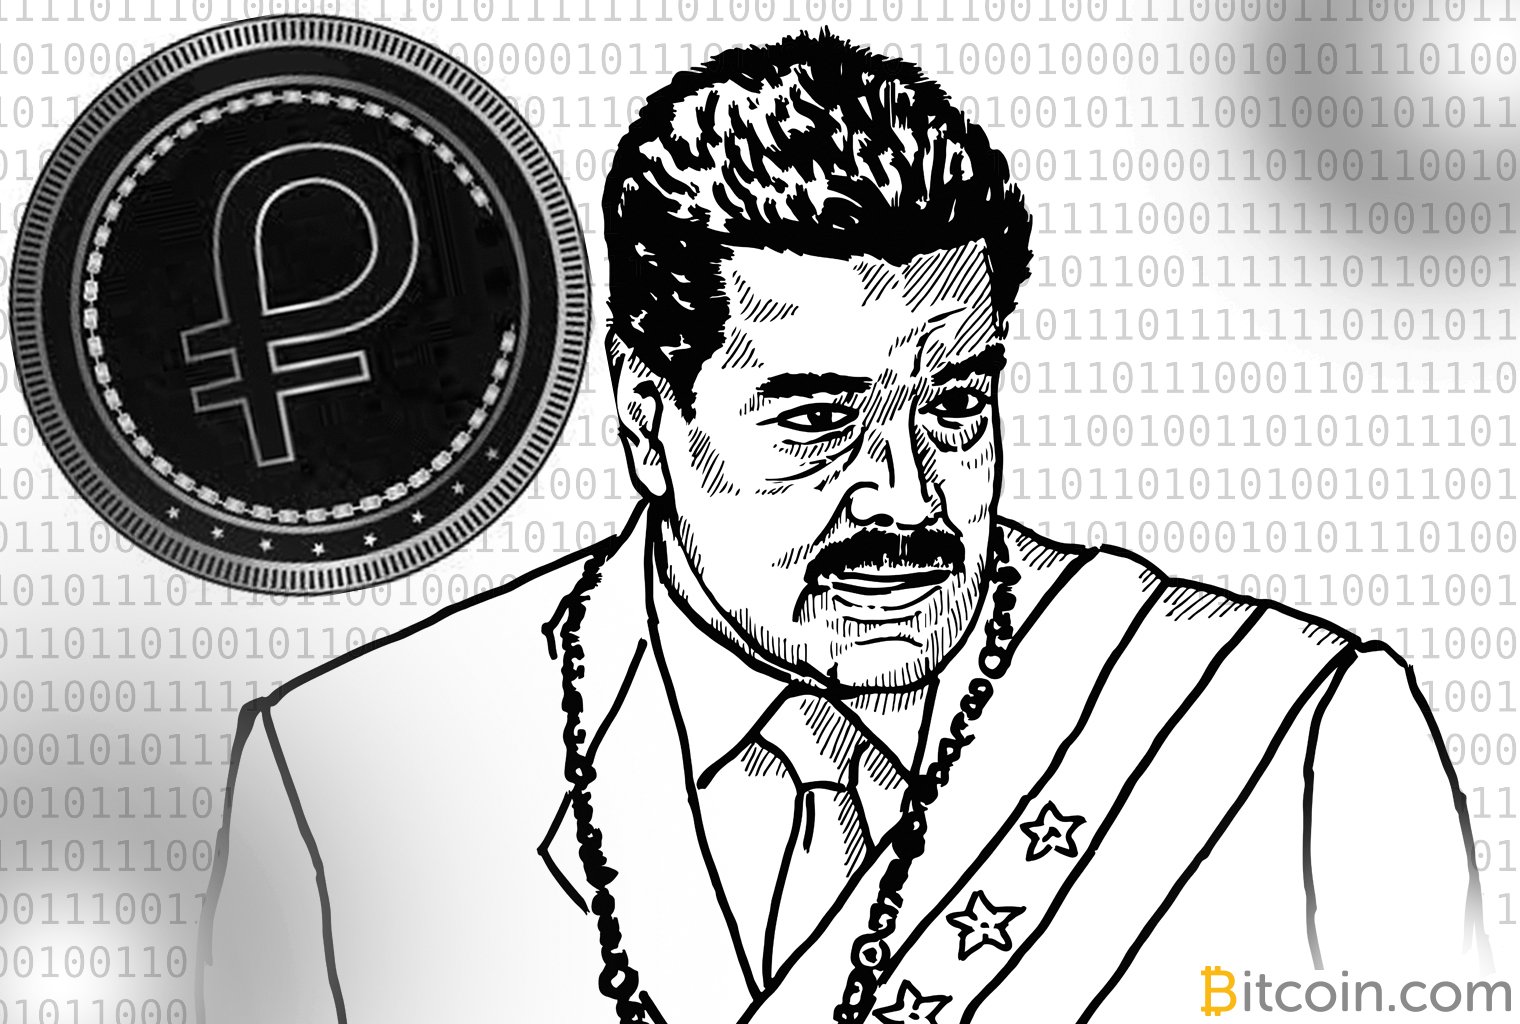 OTC Groups and State-Sanctioned Exchanges Start Trading Venezuela's Petro